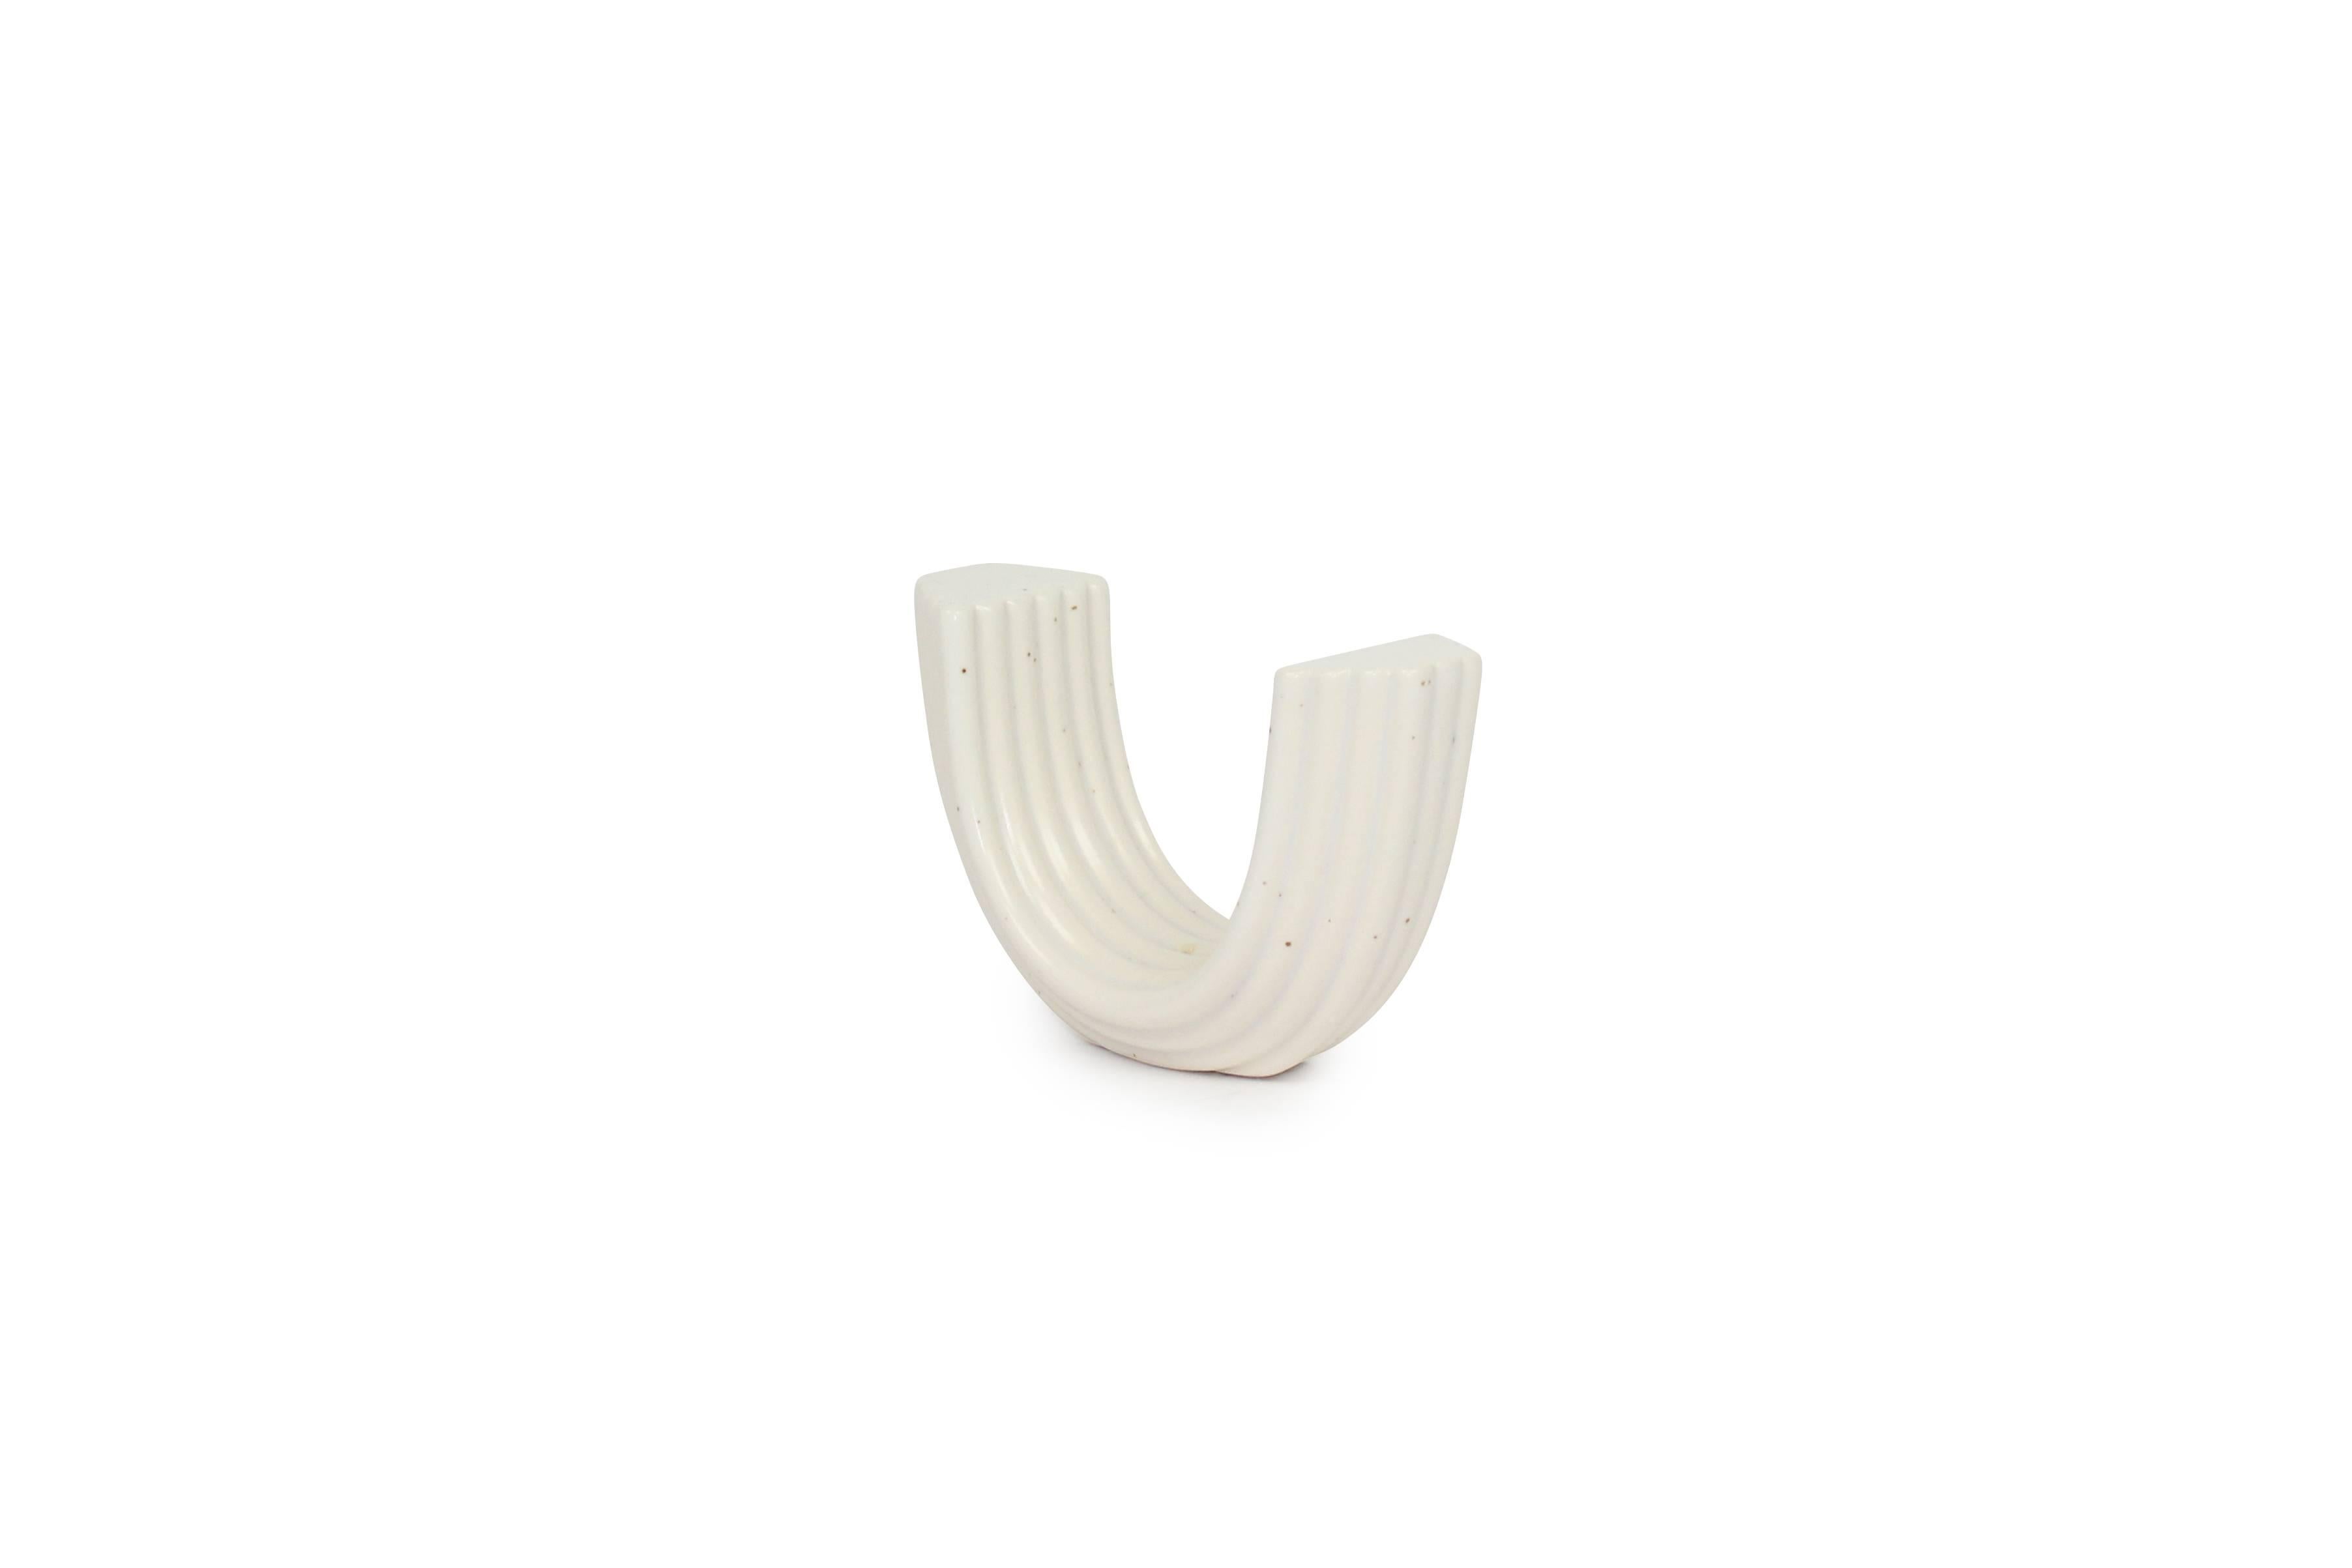 Coiled arch shape handmade ceramic incense holder.  It's minimalist yet unique design is a functional shelf or table accent for any room.  Available in additional colors.
Due to the handmade nature of this item, each piece will be slightly unique